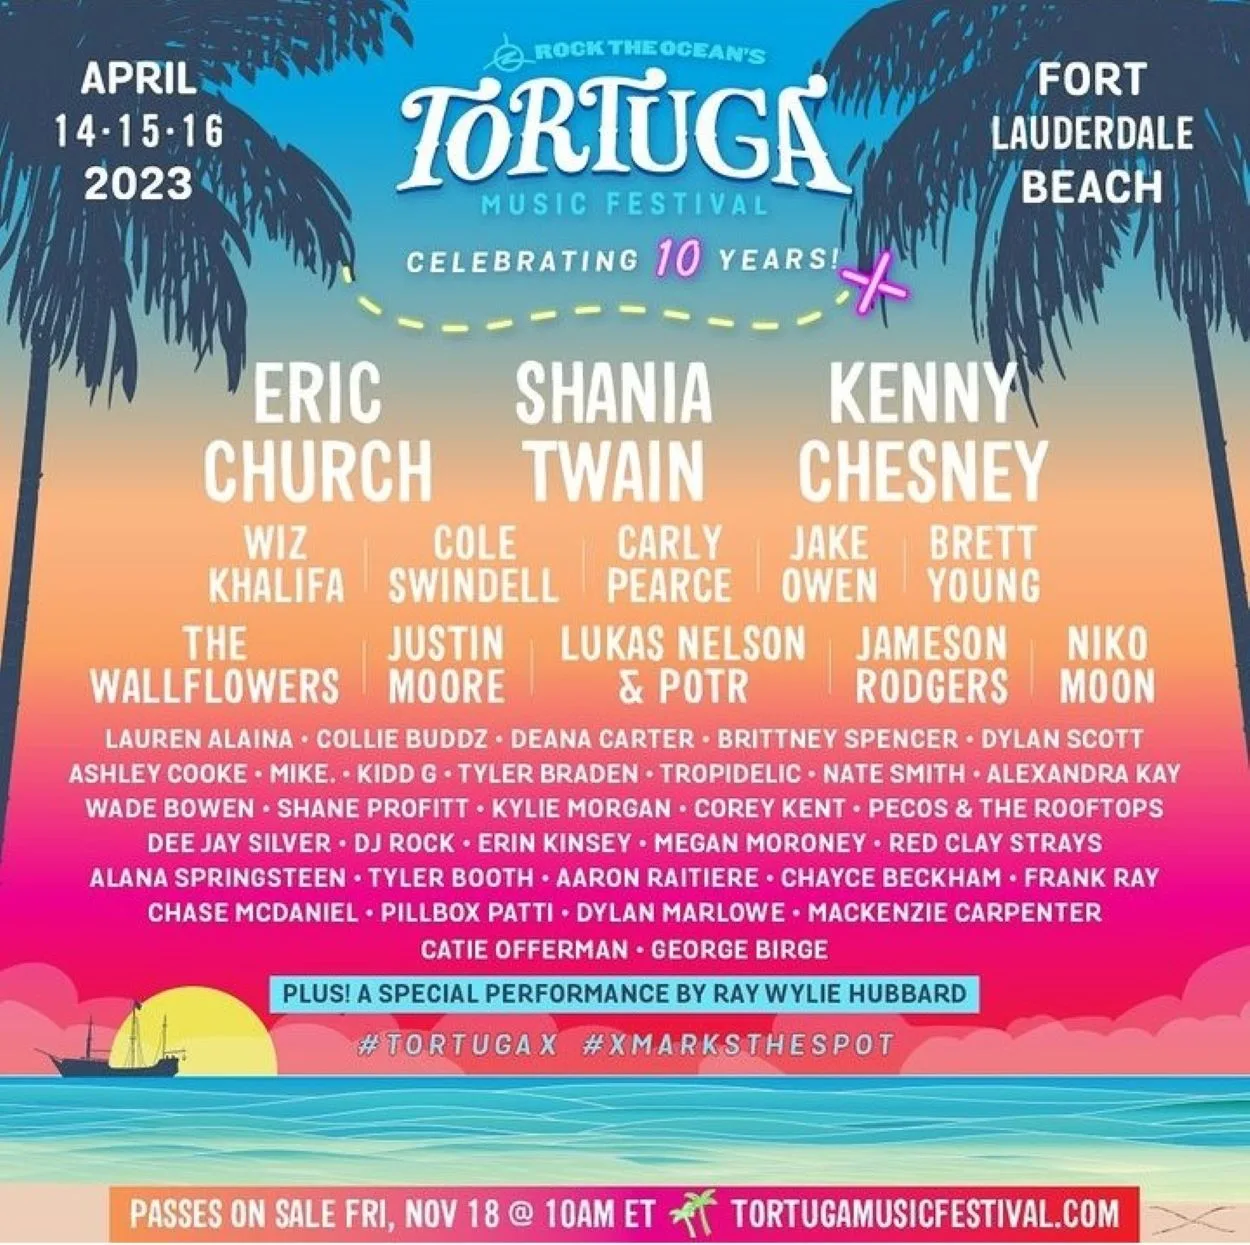 A poster of the Tortuga Music Festival 2023 listing the lineup.